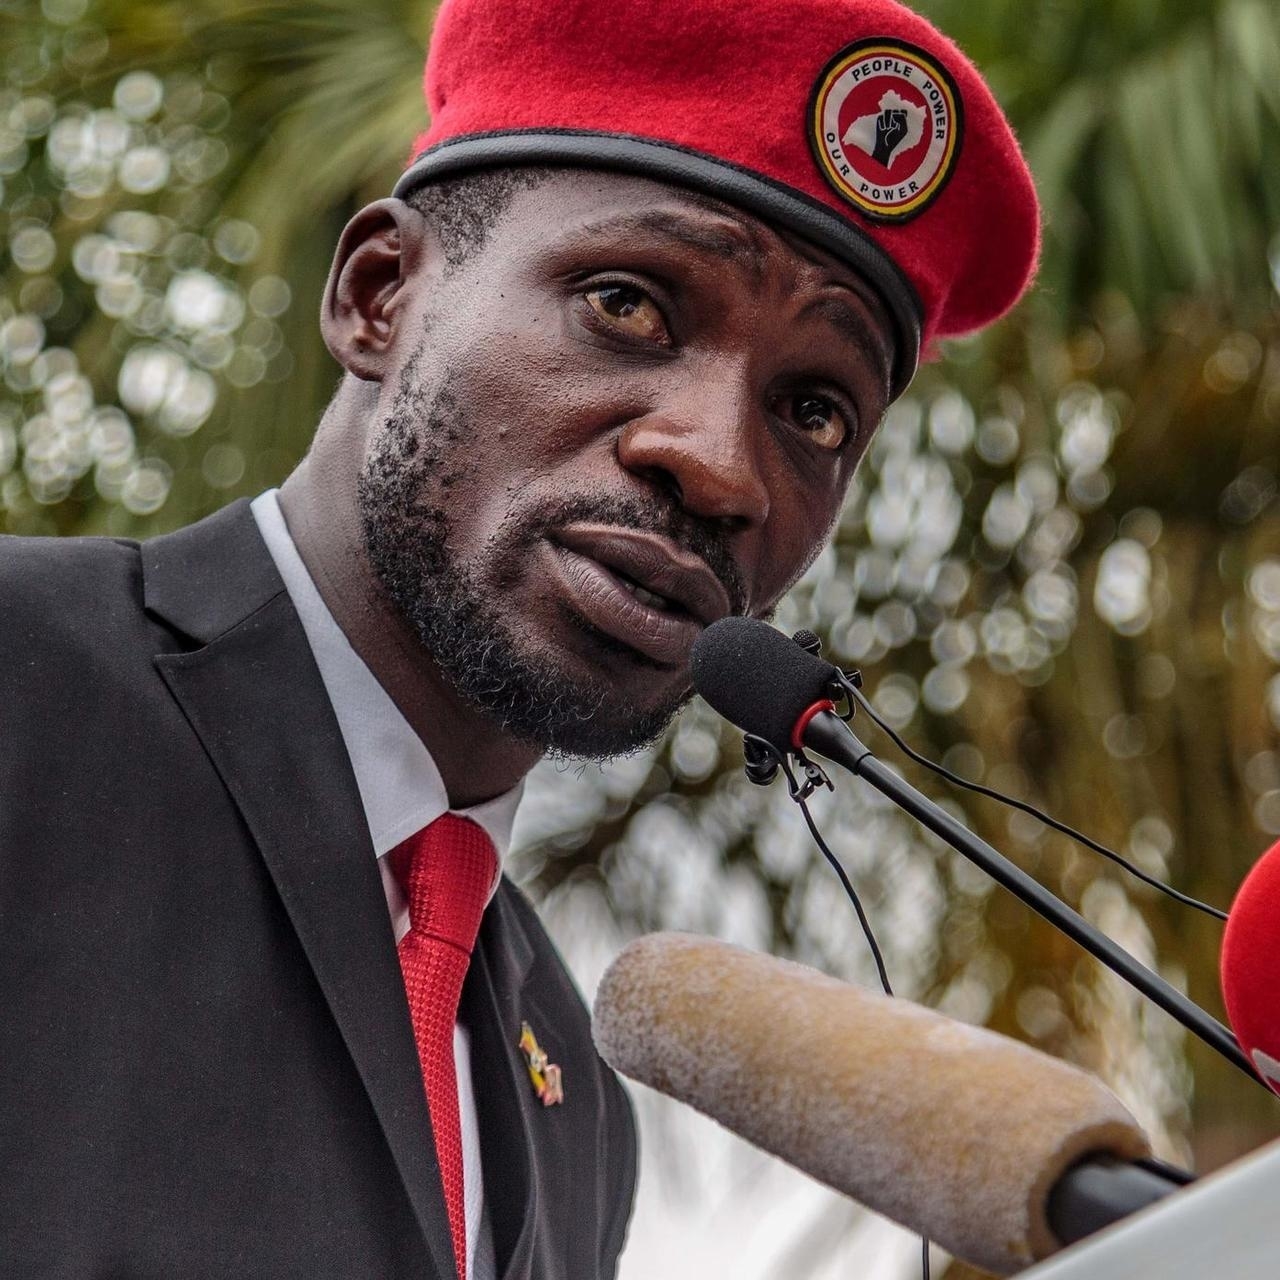 Bobi Wine calls on the police to provide "same" protection during his nomination tomorrow